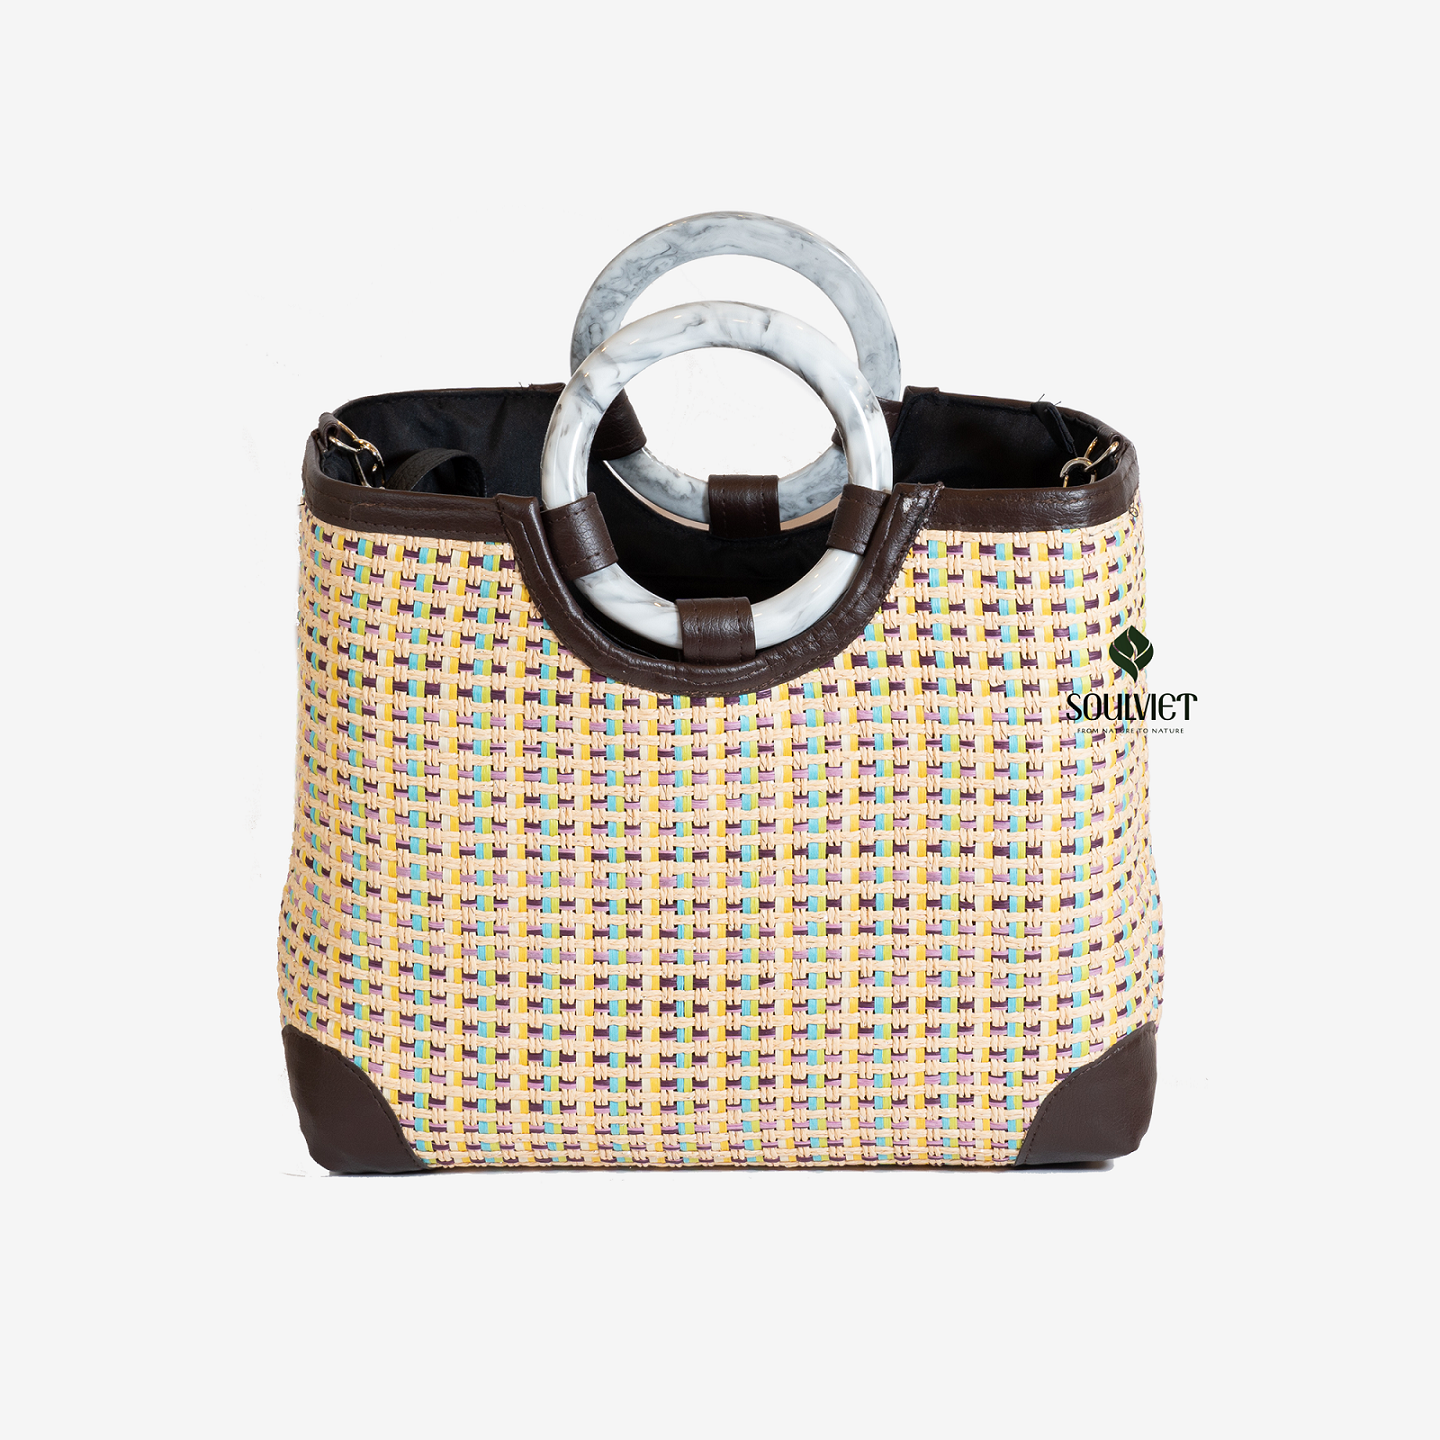 Square Woven Paper Fiber Handbag with leather border, Round Onyx Handle